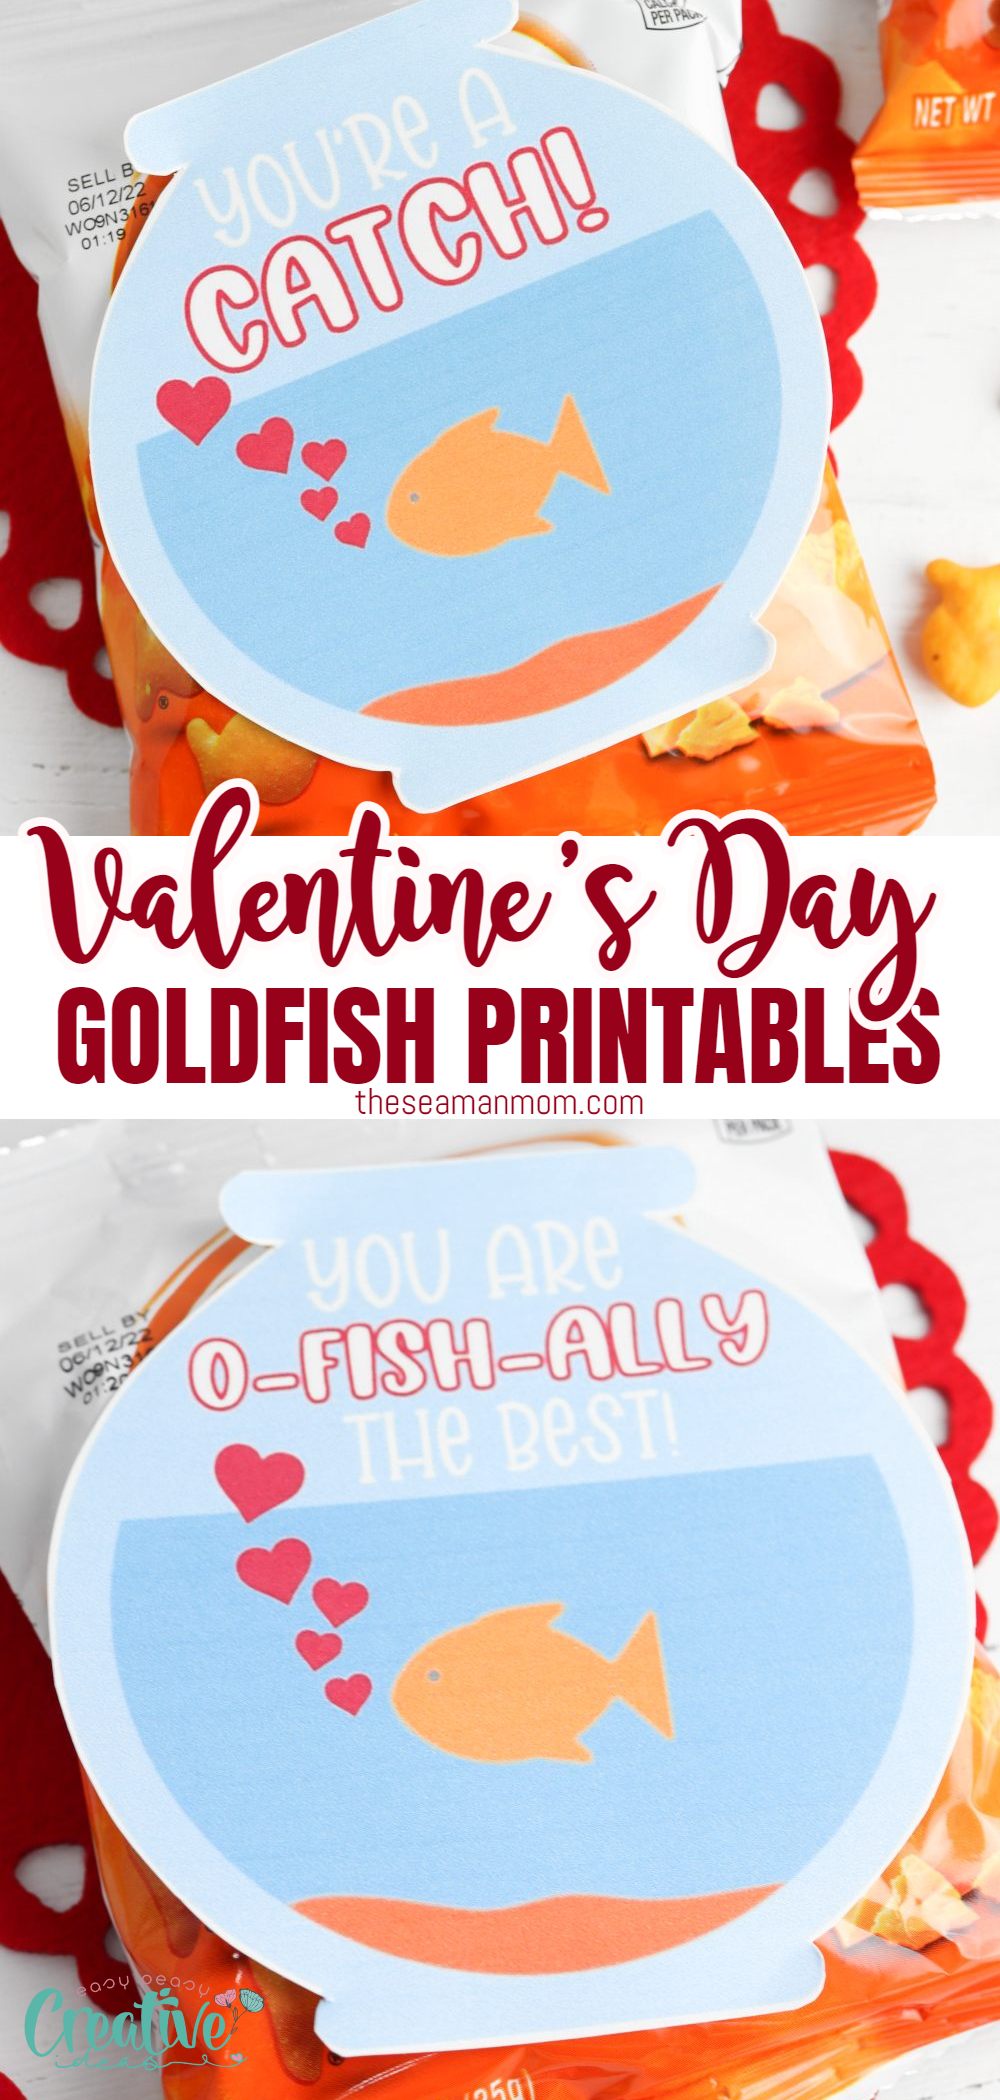 Do you want to surprise your loved ones with a unique valentine's day gift? Do you love goldfish? We do too! That’s why we created this goldfish Valentines printable card to add to your goldfish lover’s bag. It will make them smile and feel loved on Valentine's Day. Plus, it's free! Just download the file below and print at home or take it into a local printer. You can even use our design as an invitation to a party or just share with friends on social media! via @petroneagu